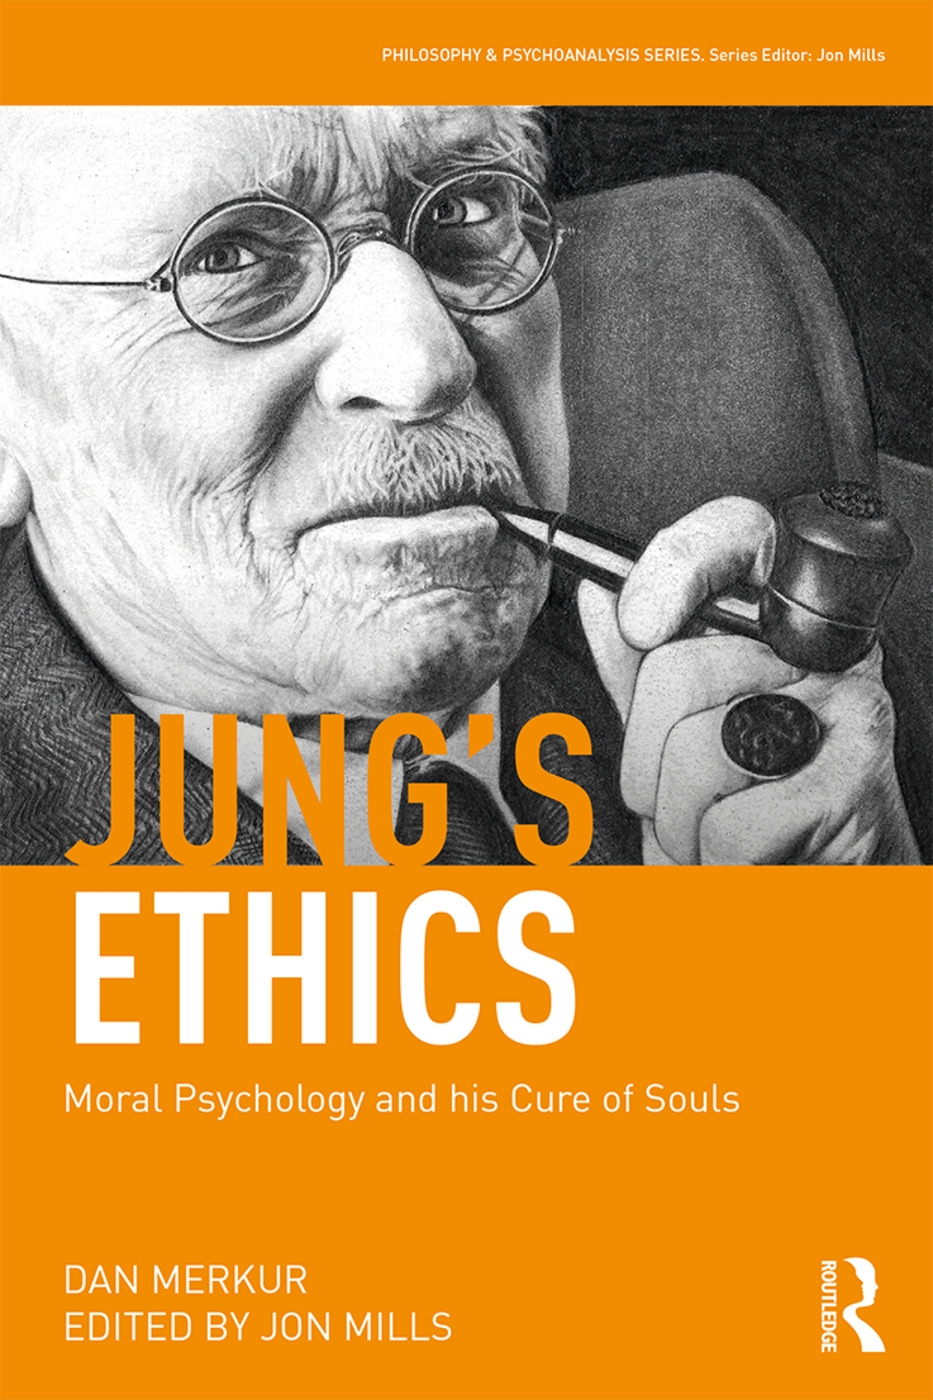 Jung’s Ethics: Moral Psychology and His Cure of Souls